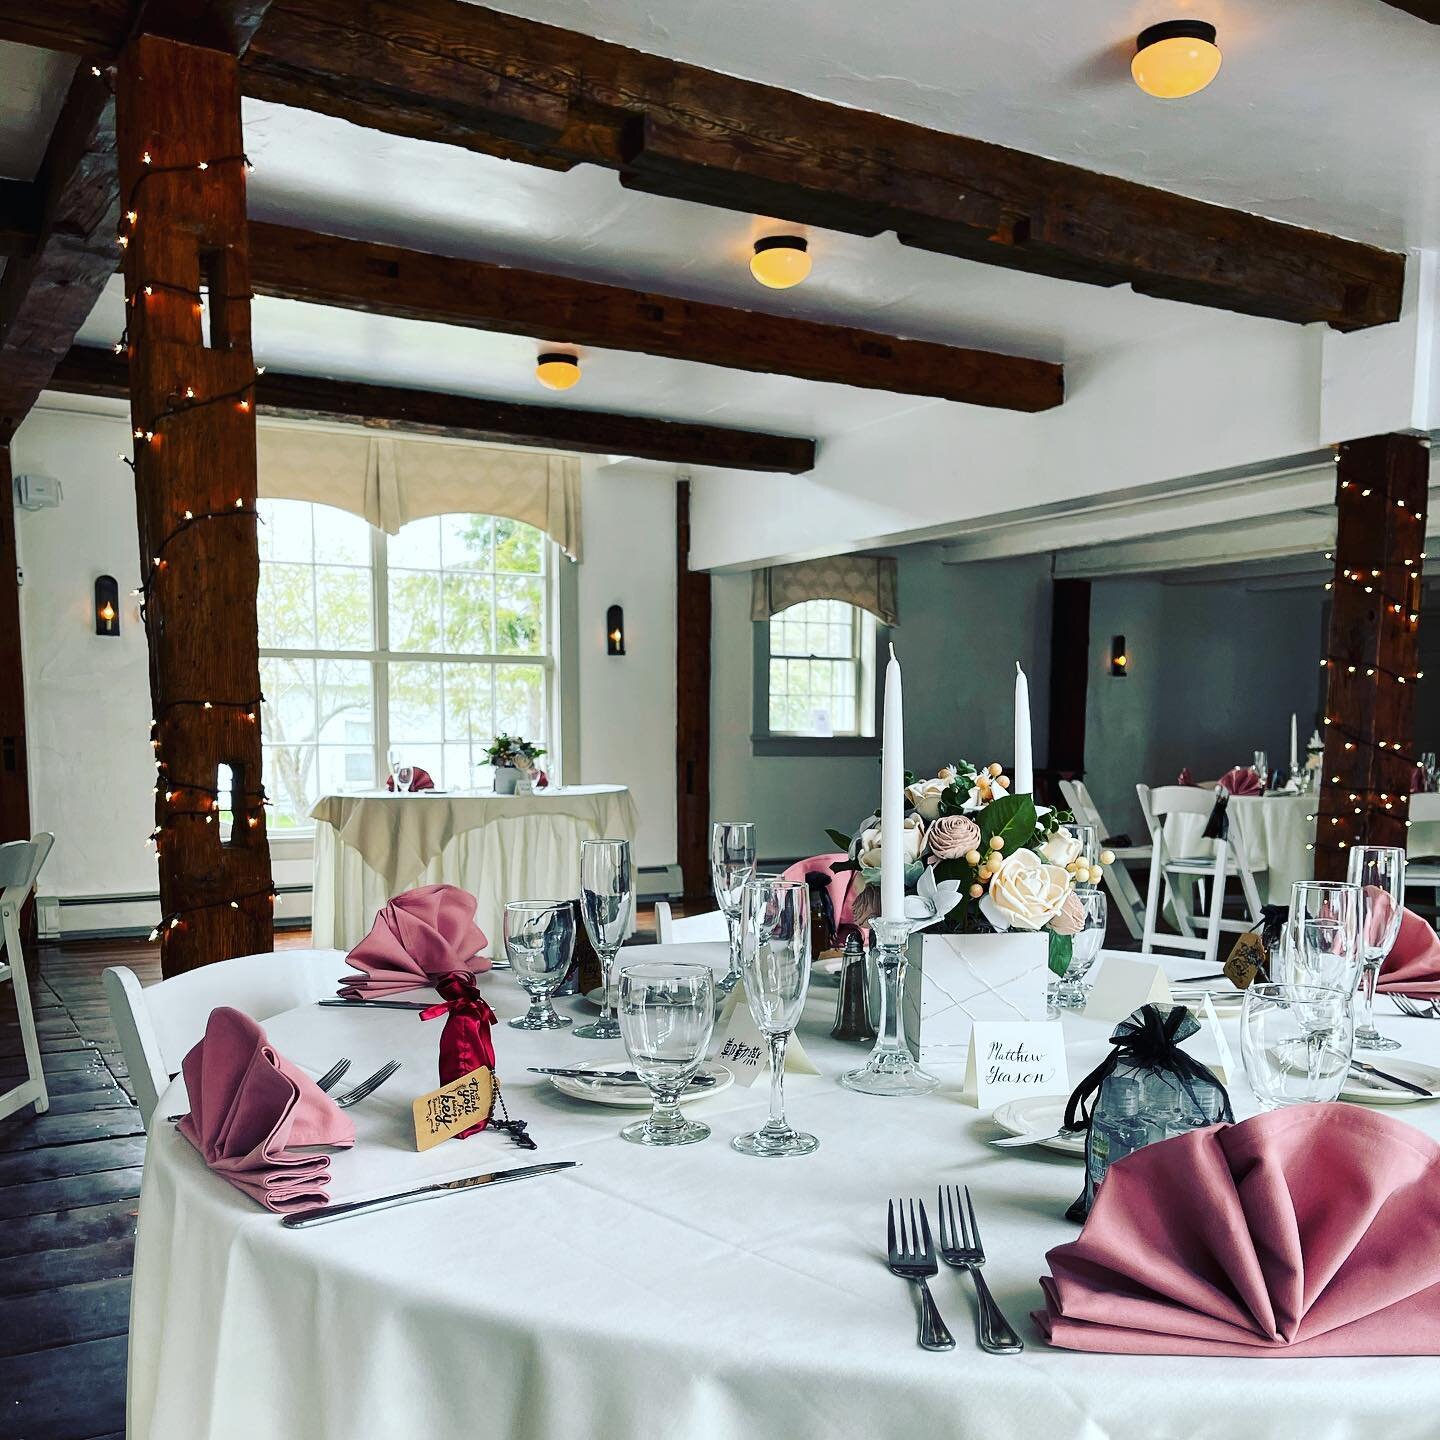 Kicking off wedding season 2021! Excited to be celebrating with couples as we have the end of the pandemic in sight. :)

#countryweddings #weddingseason #springweddings #dowdscountryinn #lymenh #newenglandweddings #newhampshirewedding